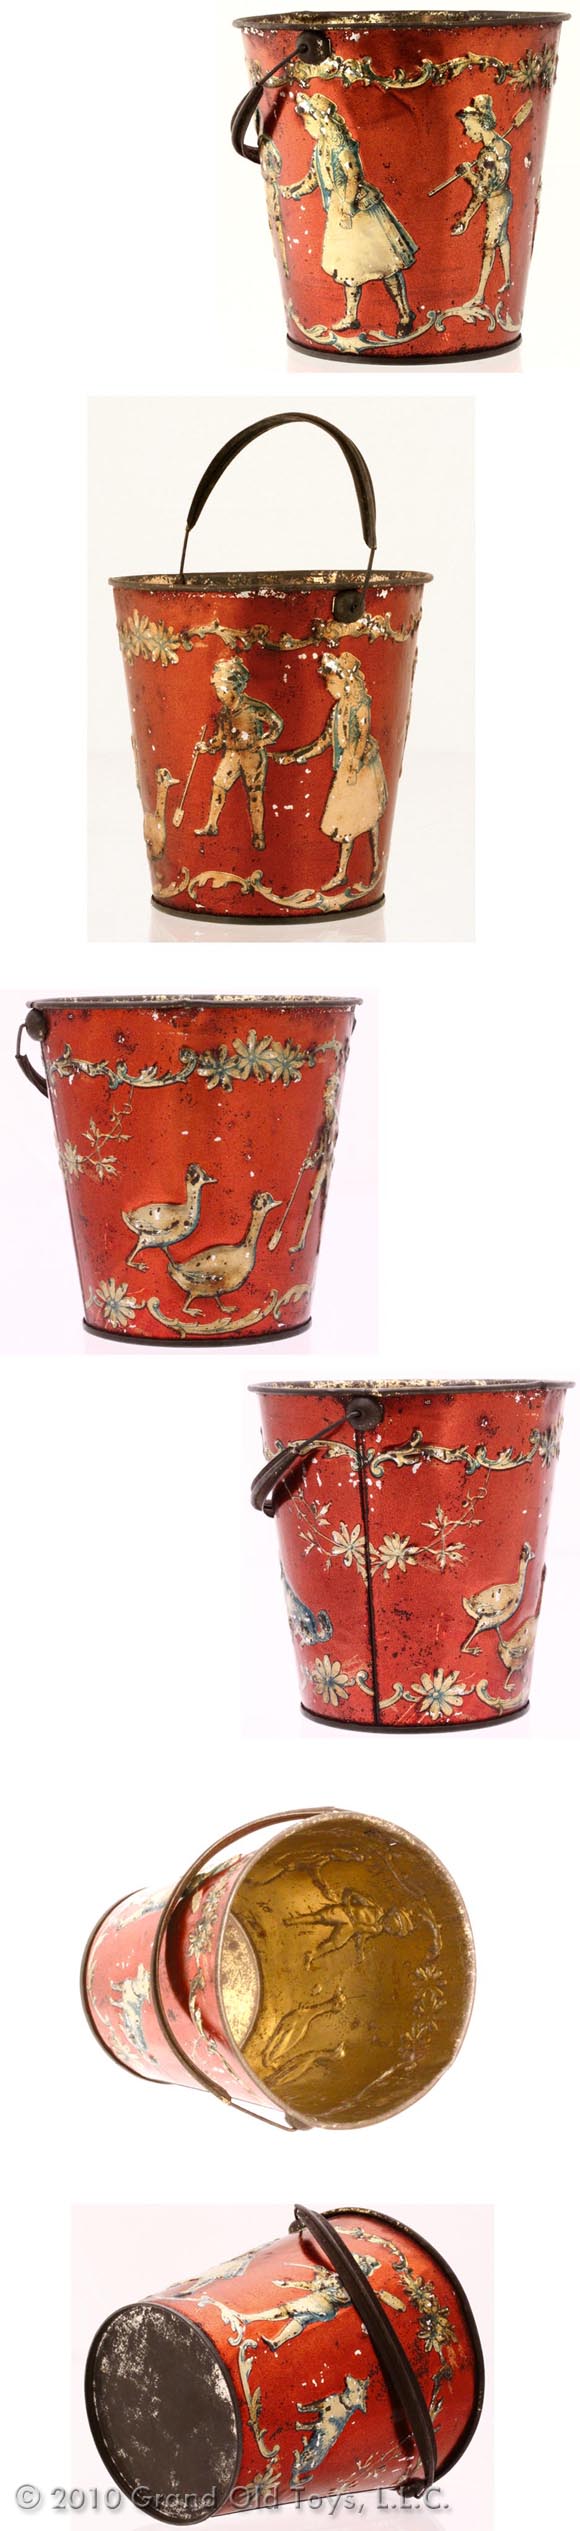 c.1900 Childrens Victorian Red Sand Pail with Bail